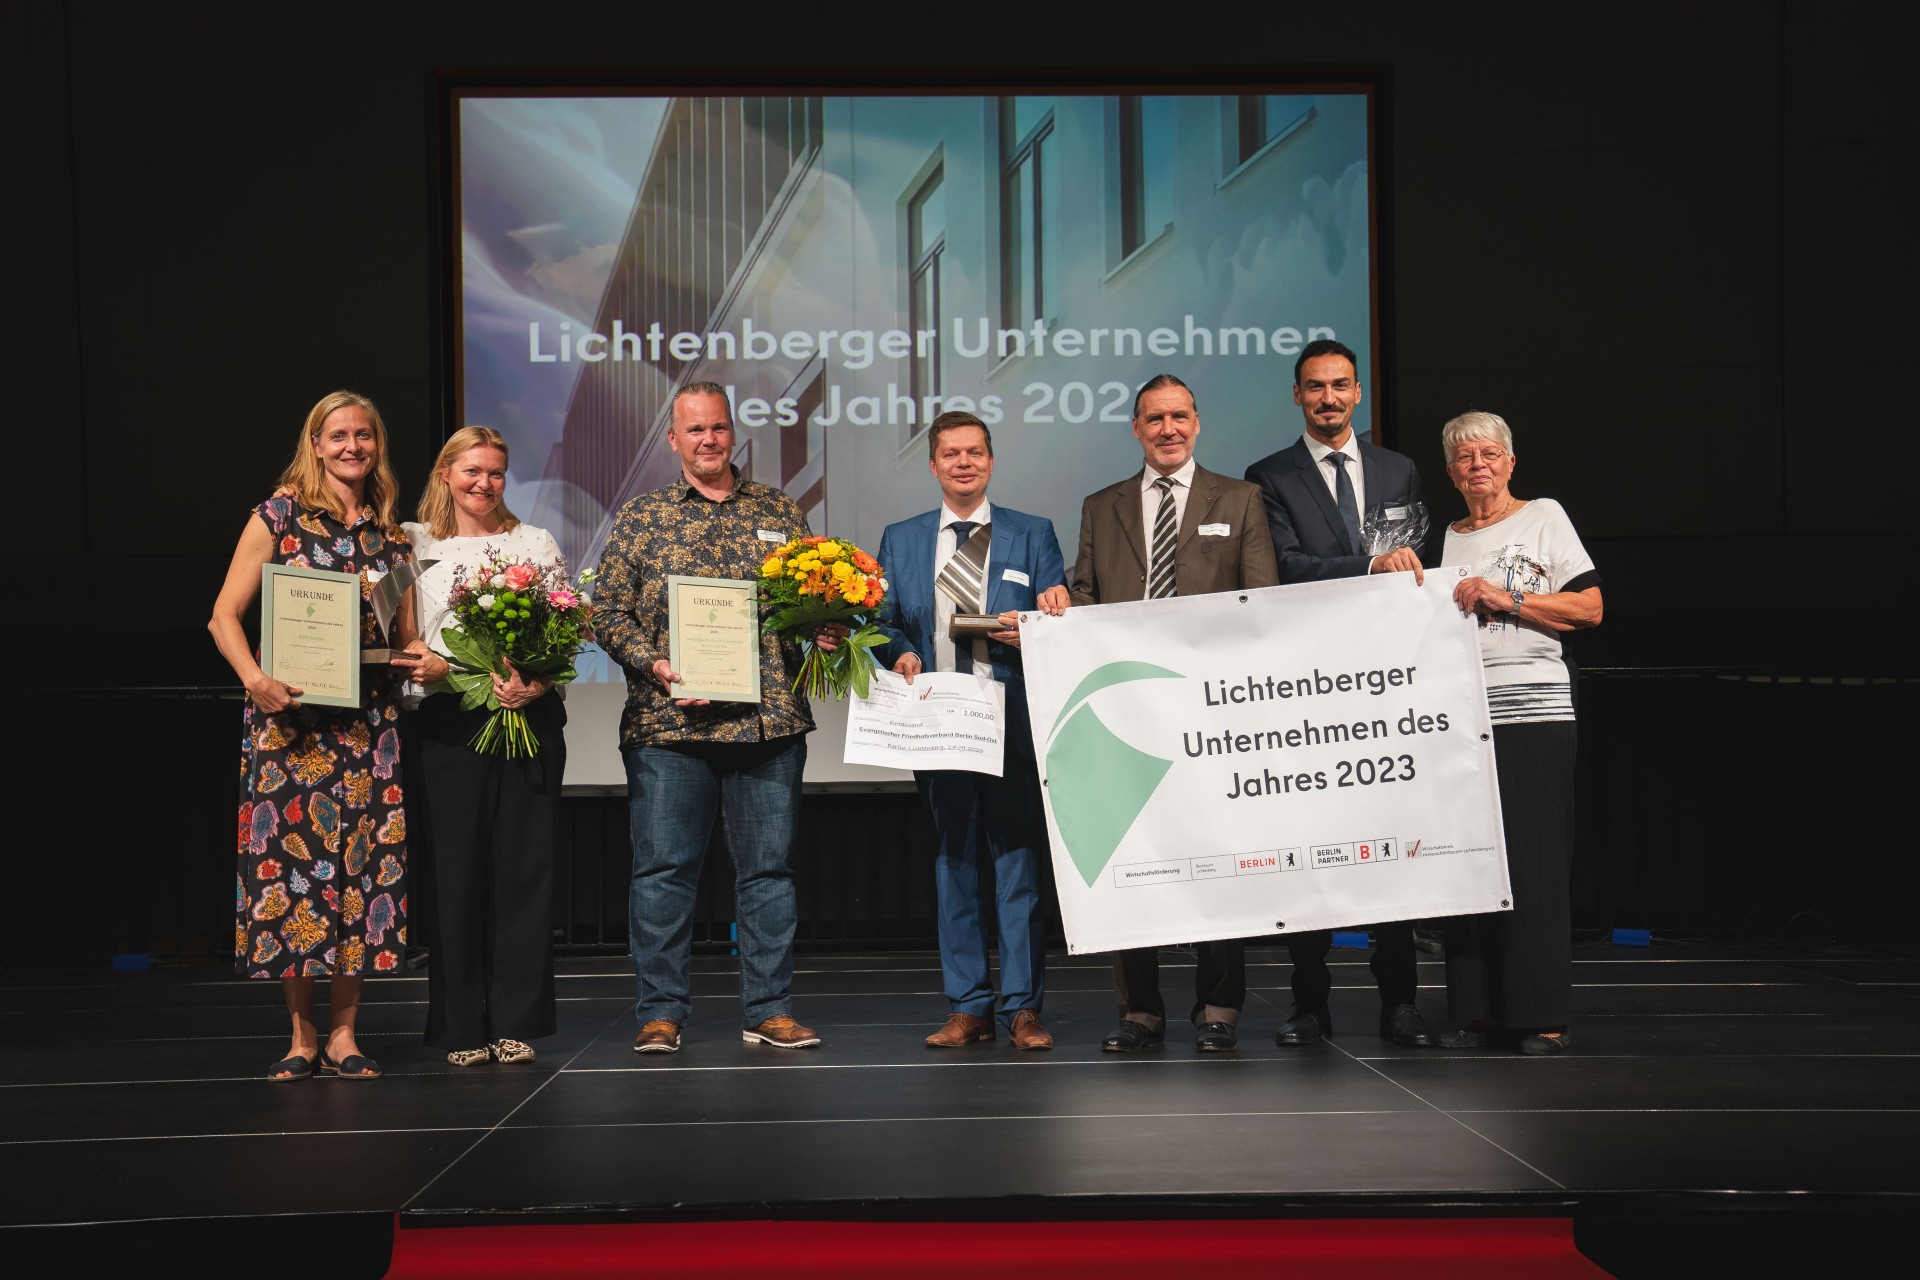 Award ceremony for the Lichtenberg Company of the Year 2023